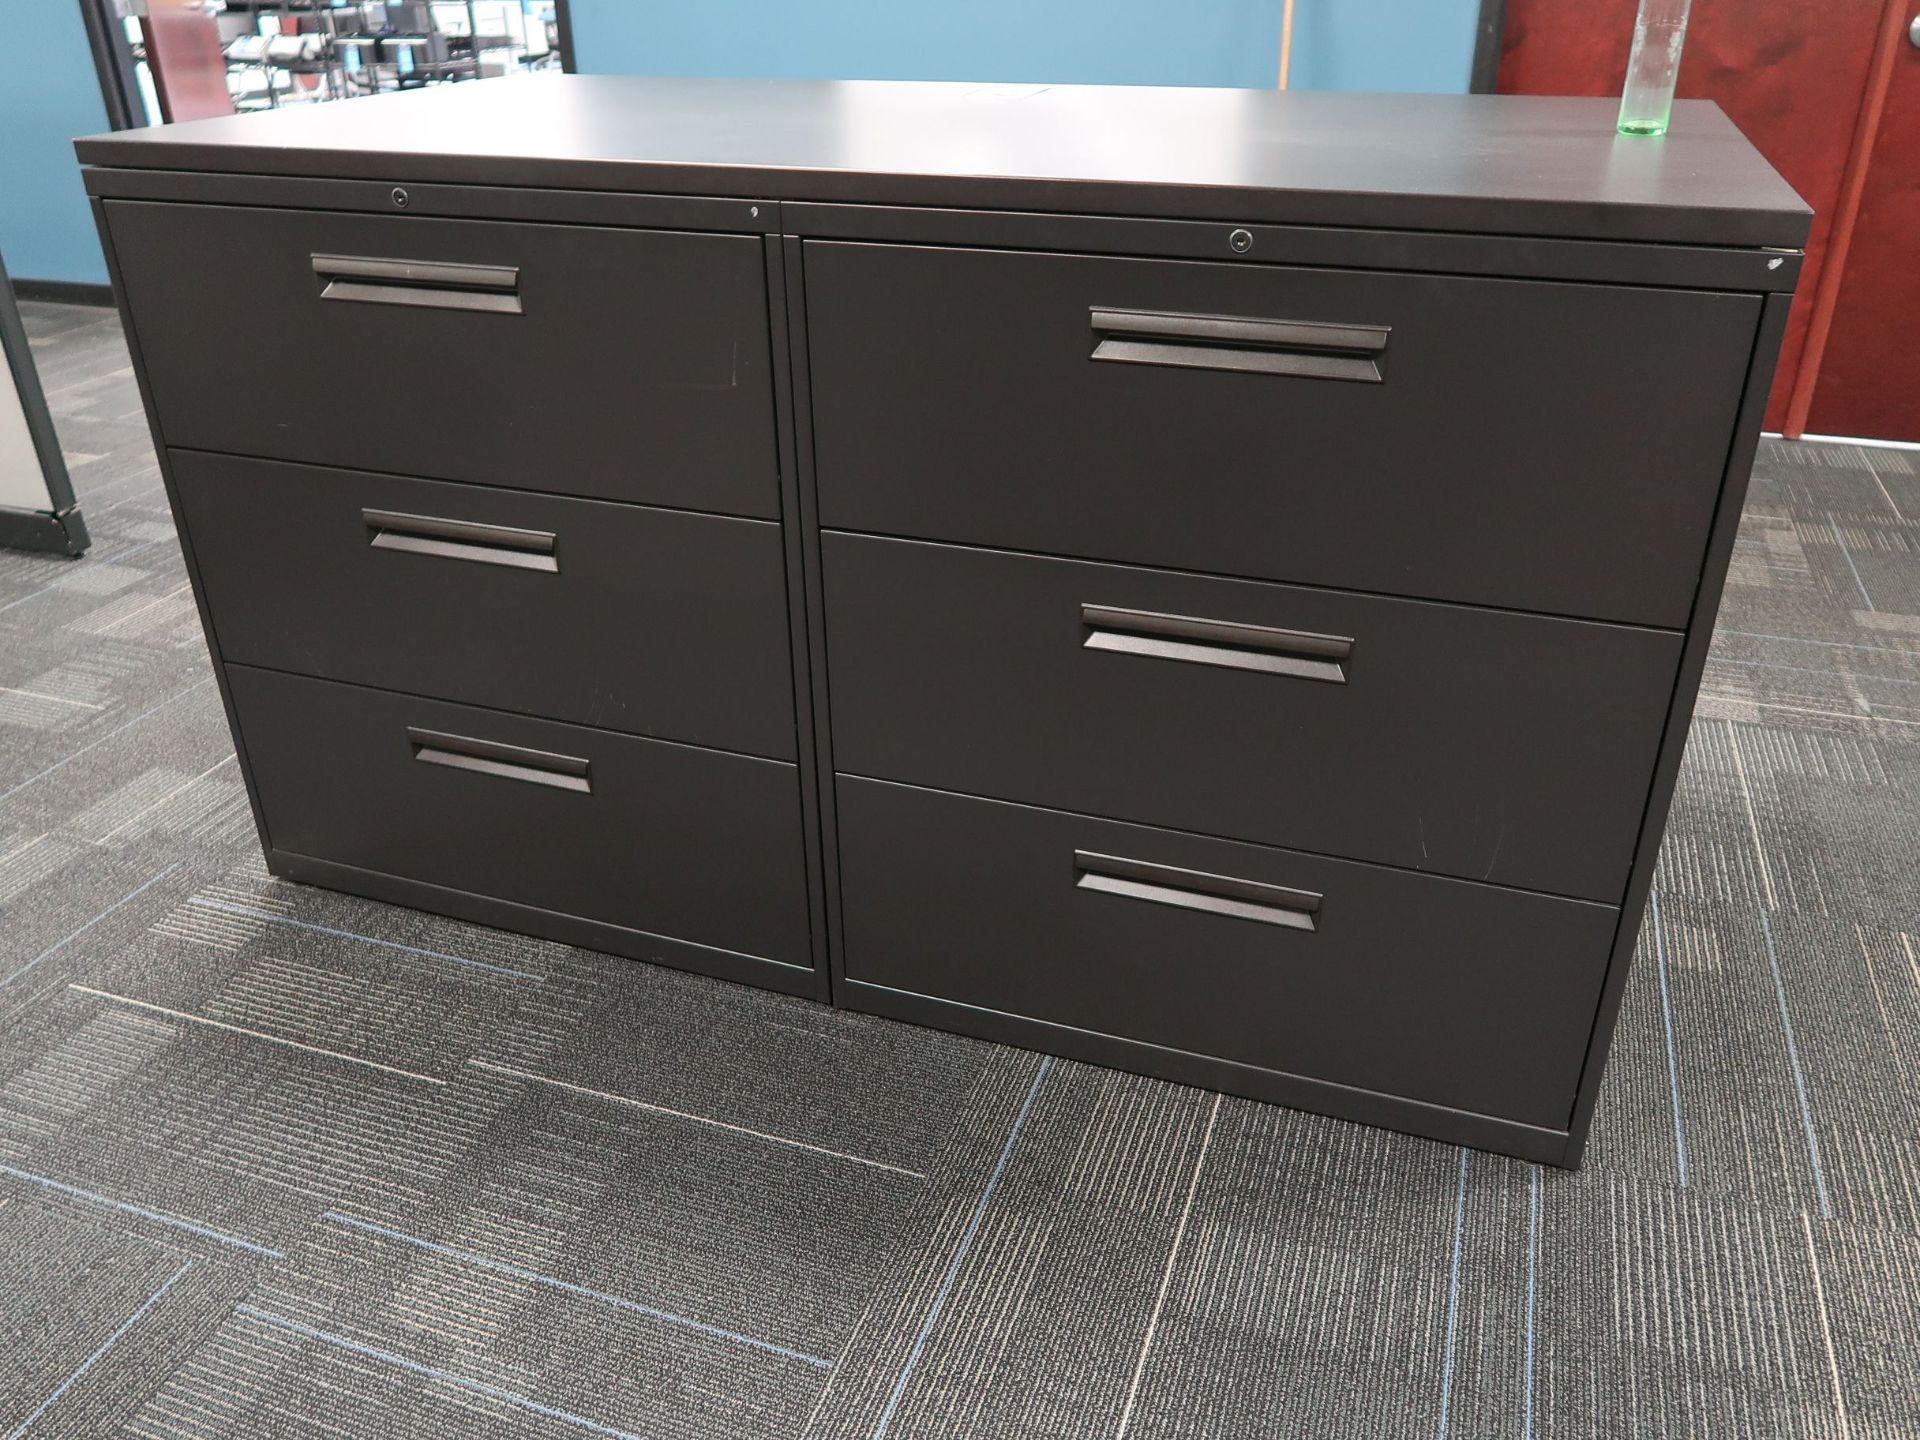 36" WIDE BLACK THREE-DRAWER LATERAL FILE CABINETS W/ 36" X 72" LAMINATED COMMON TOP - Image 2 of 2